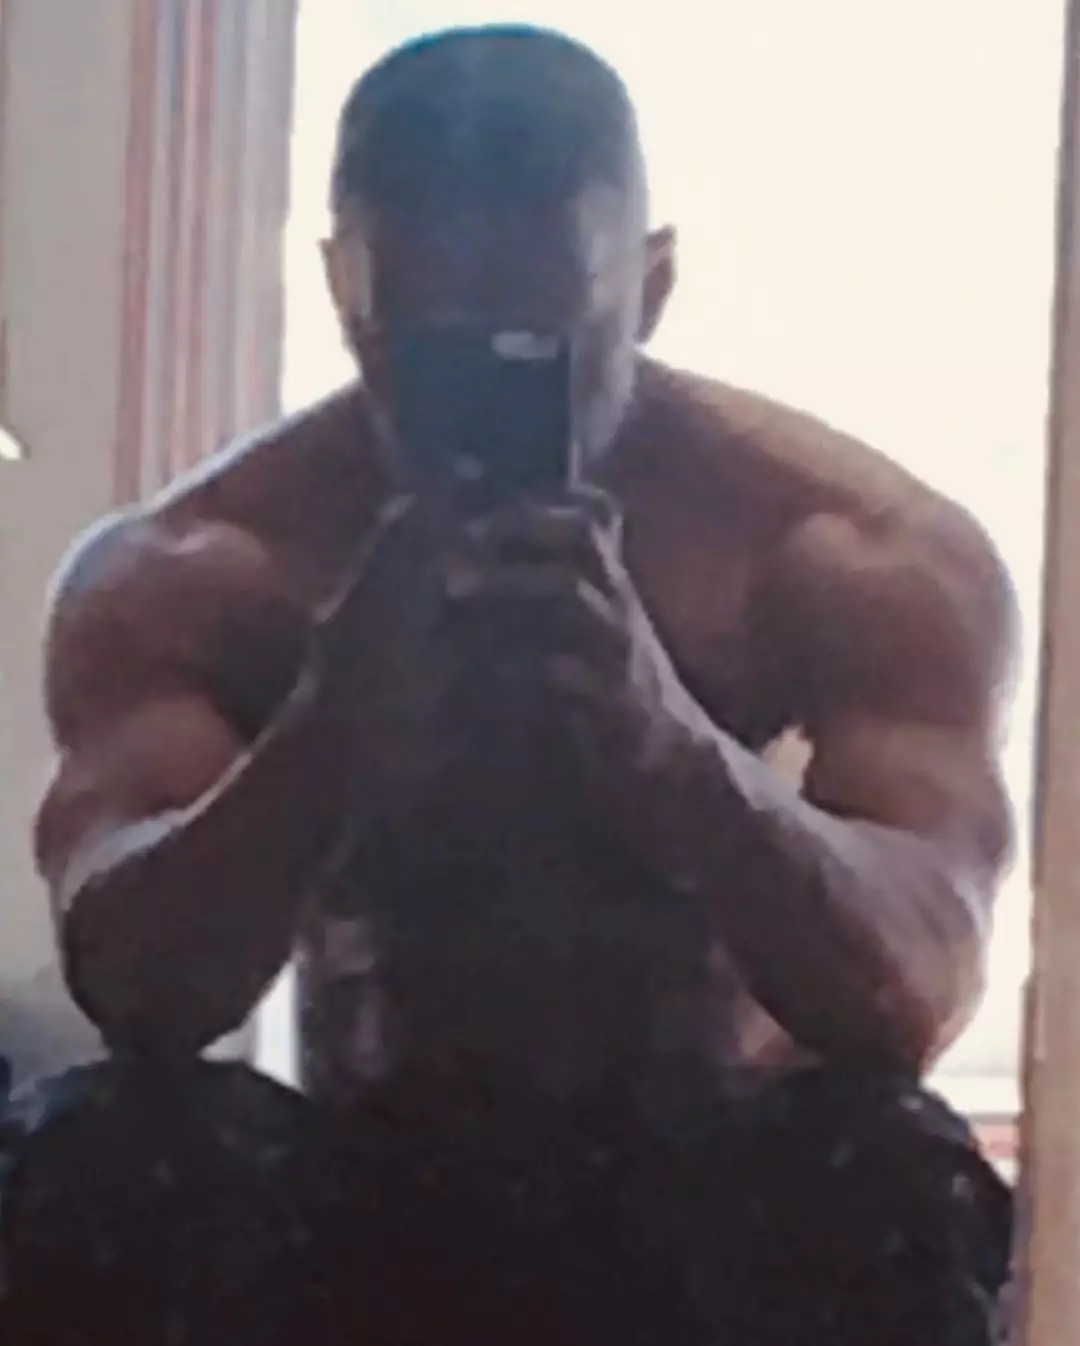 Jamie Foxx has bulked up to play Mike Tyson.